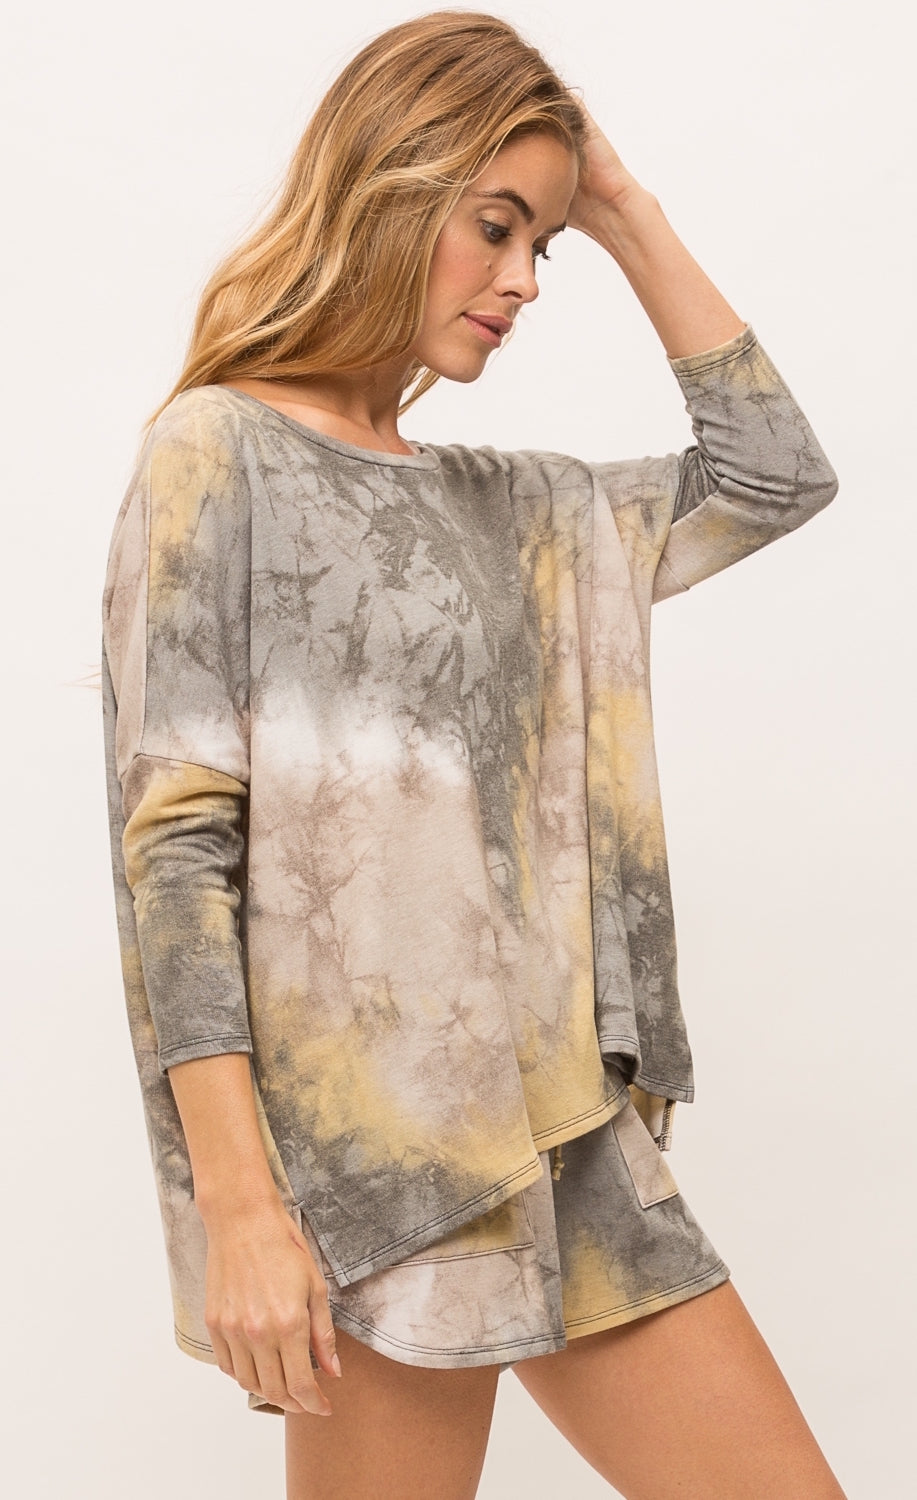 Right side top half view of a woman wearing the mystree bluestone tie dye top. This top is a grey and yellow tie top with long sleeves and a boxy fit.